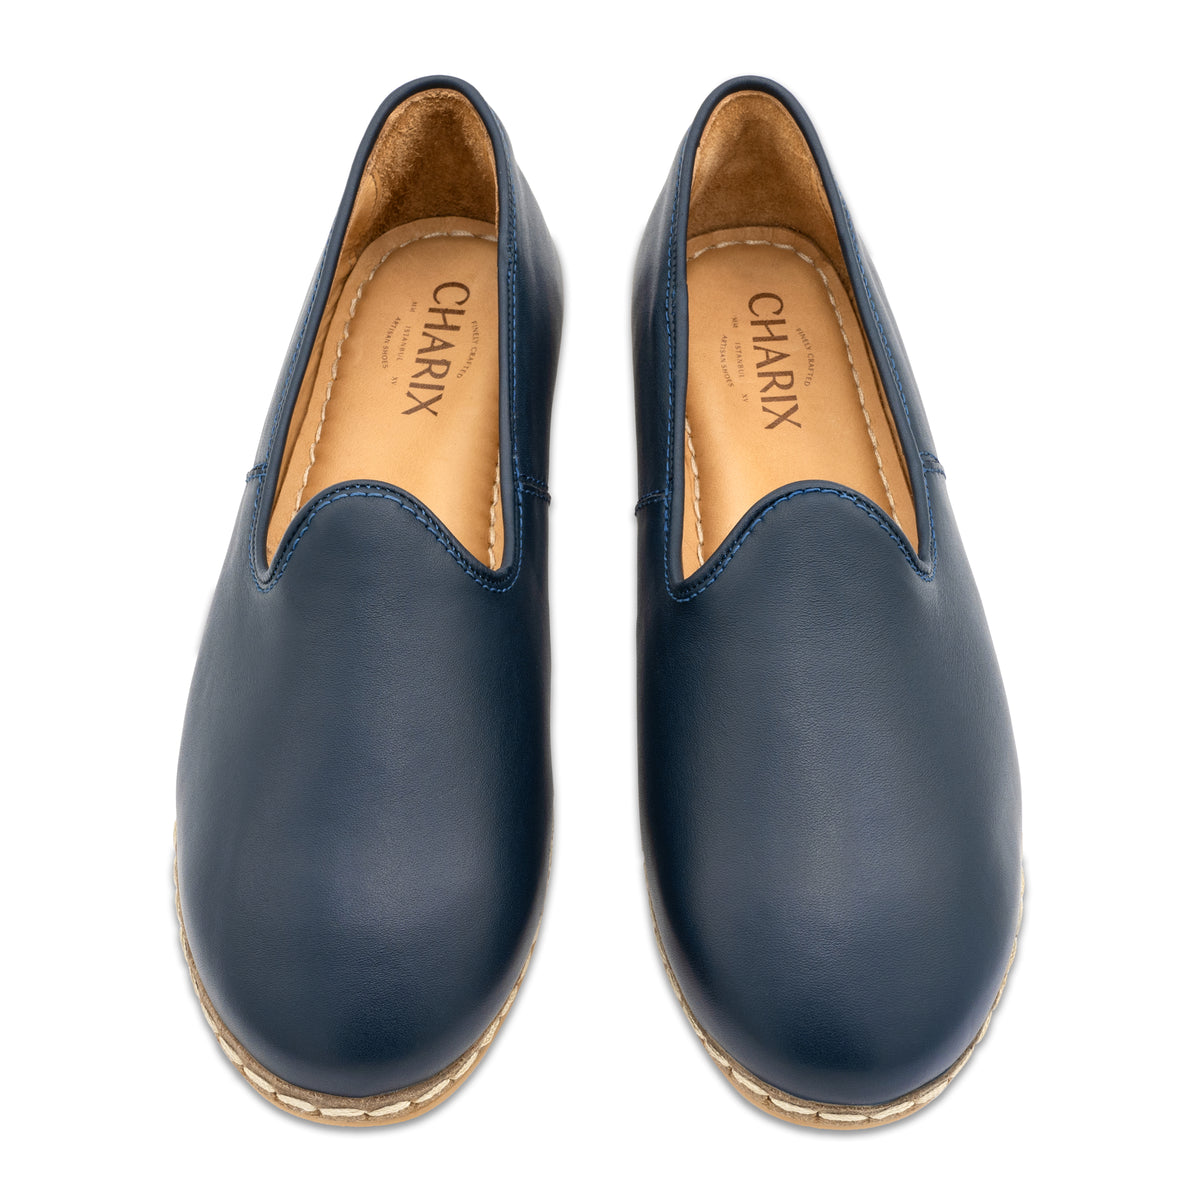 Midnight Blue Slip On Shoes - Charix Shoes